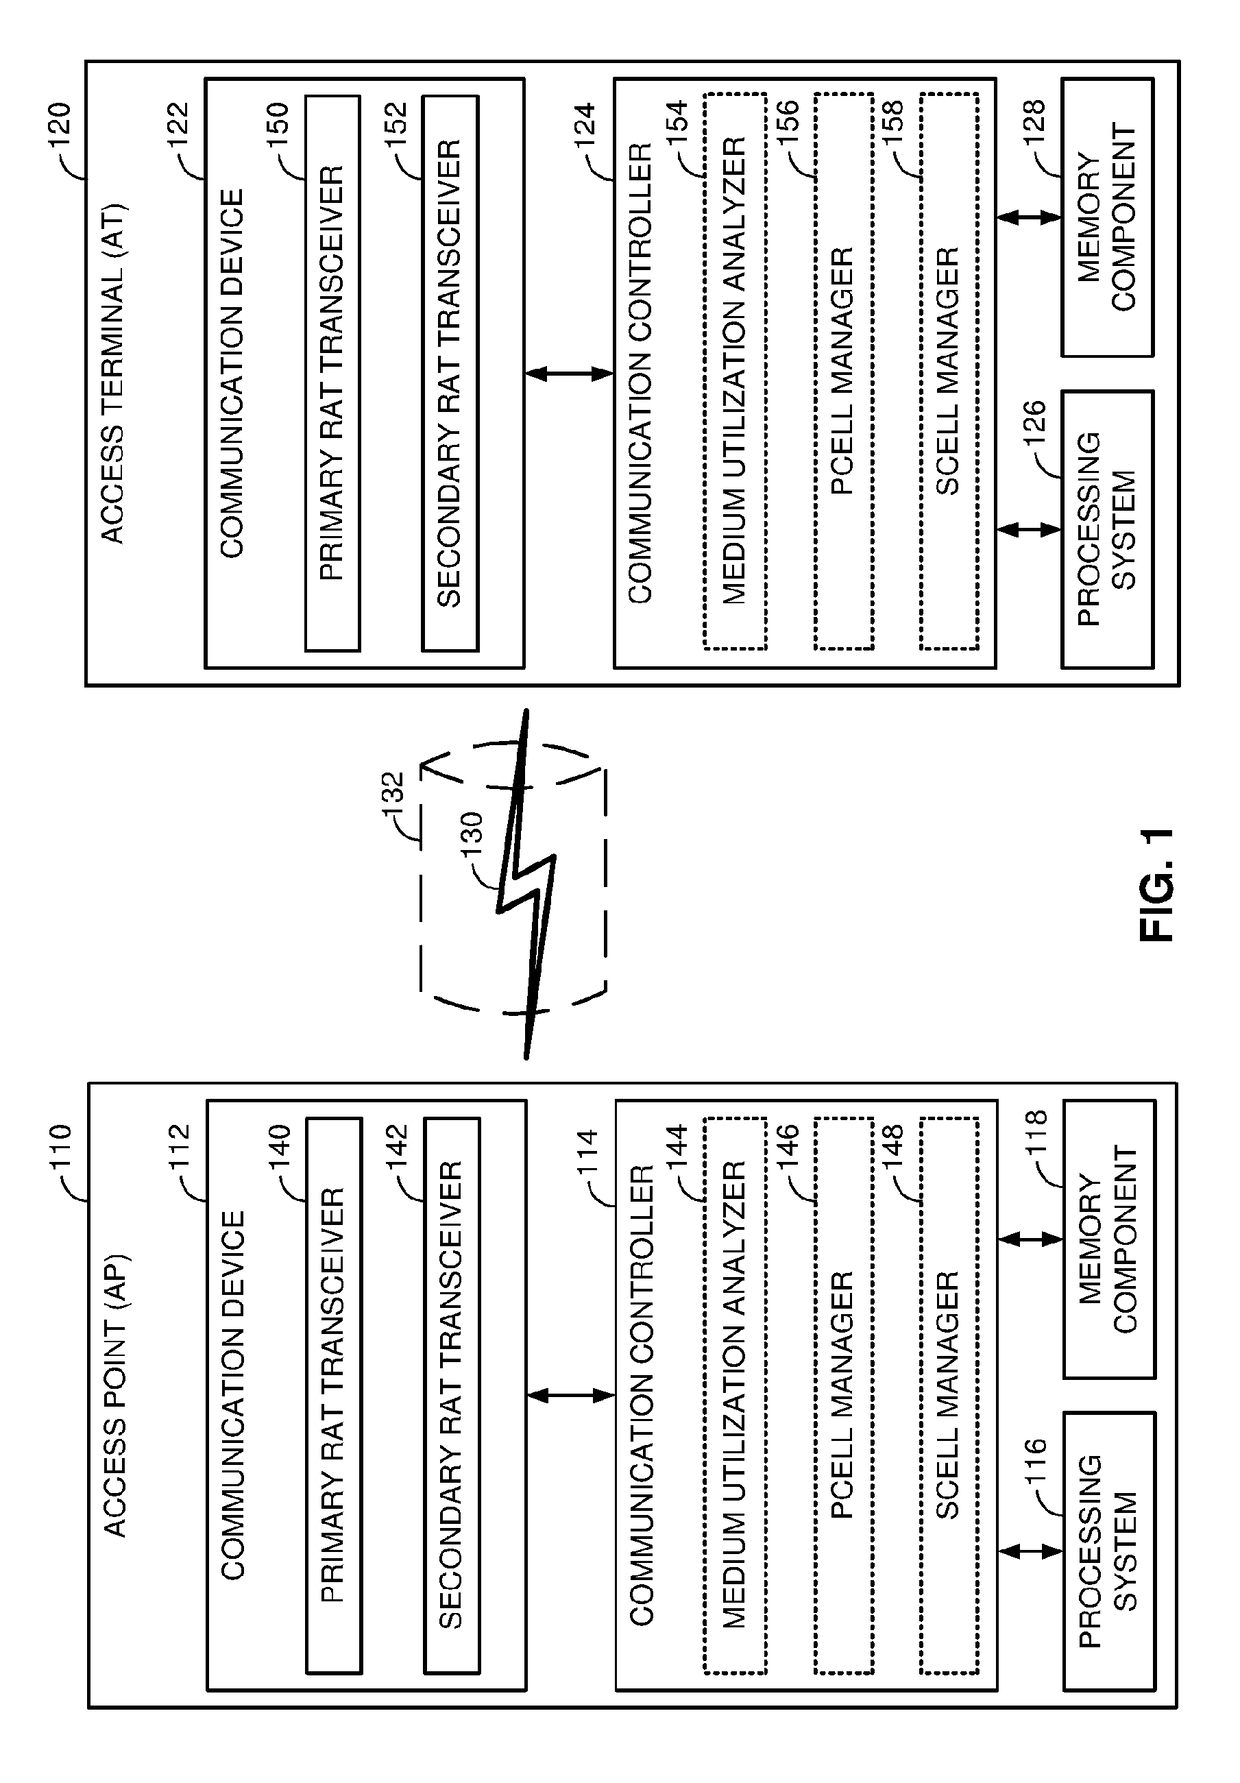 Cell switching for discontinuous transmission (DTX) in shared spectrum